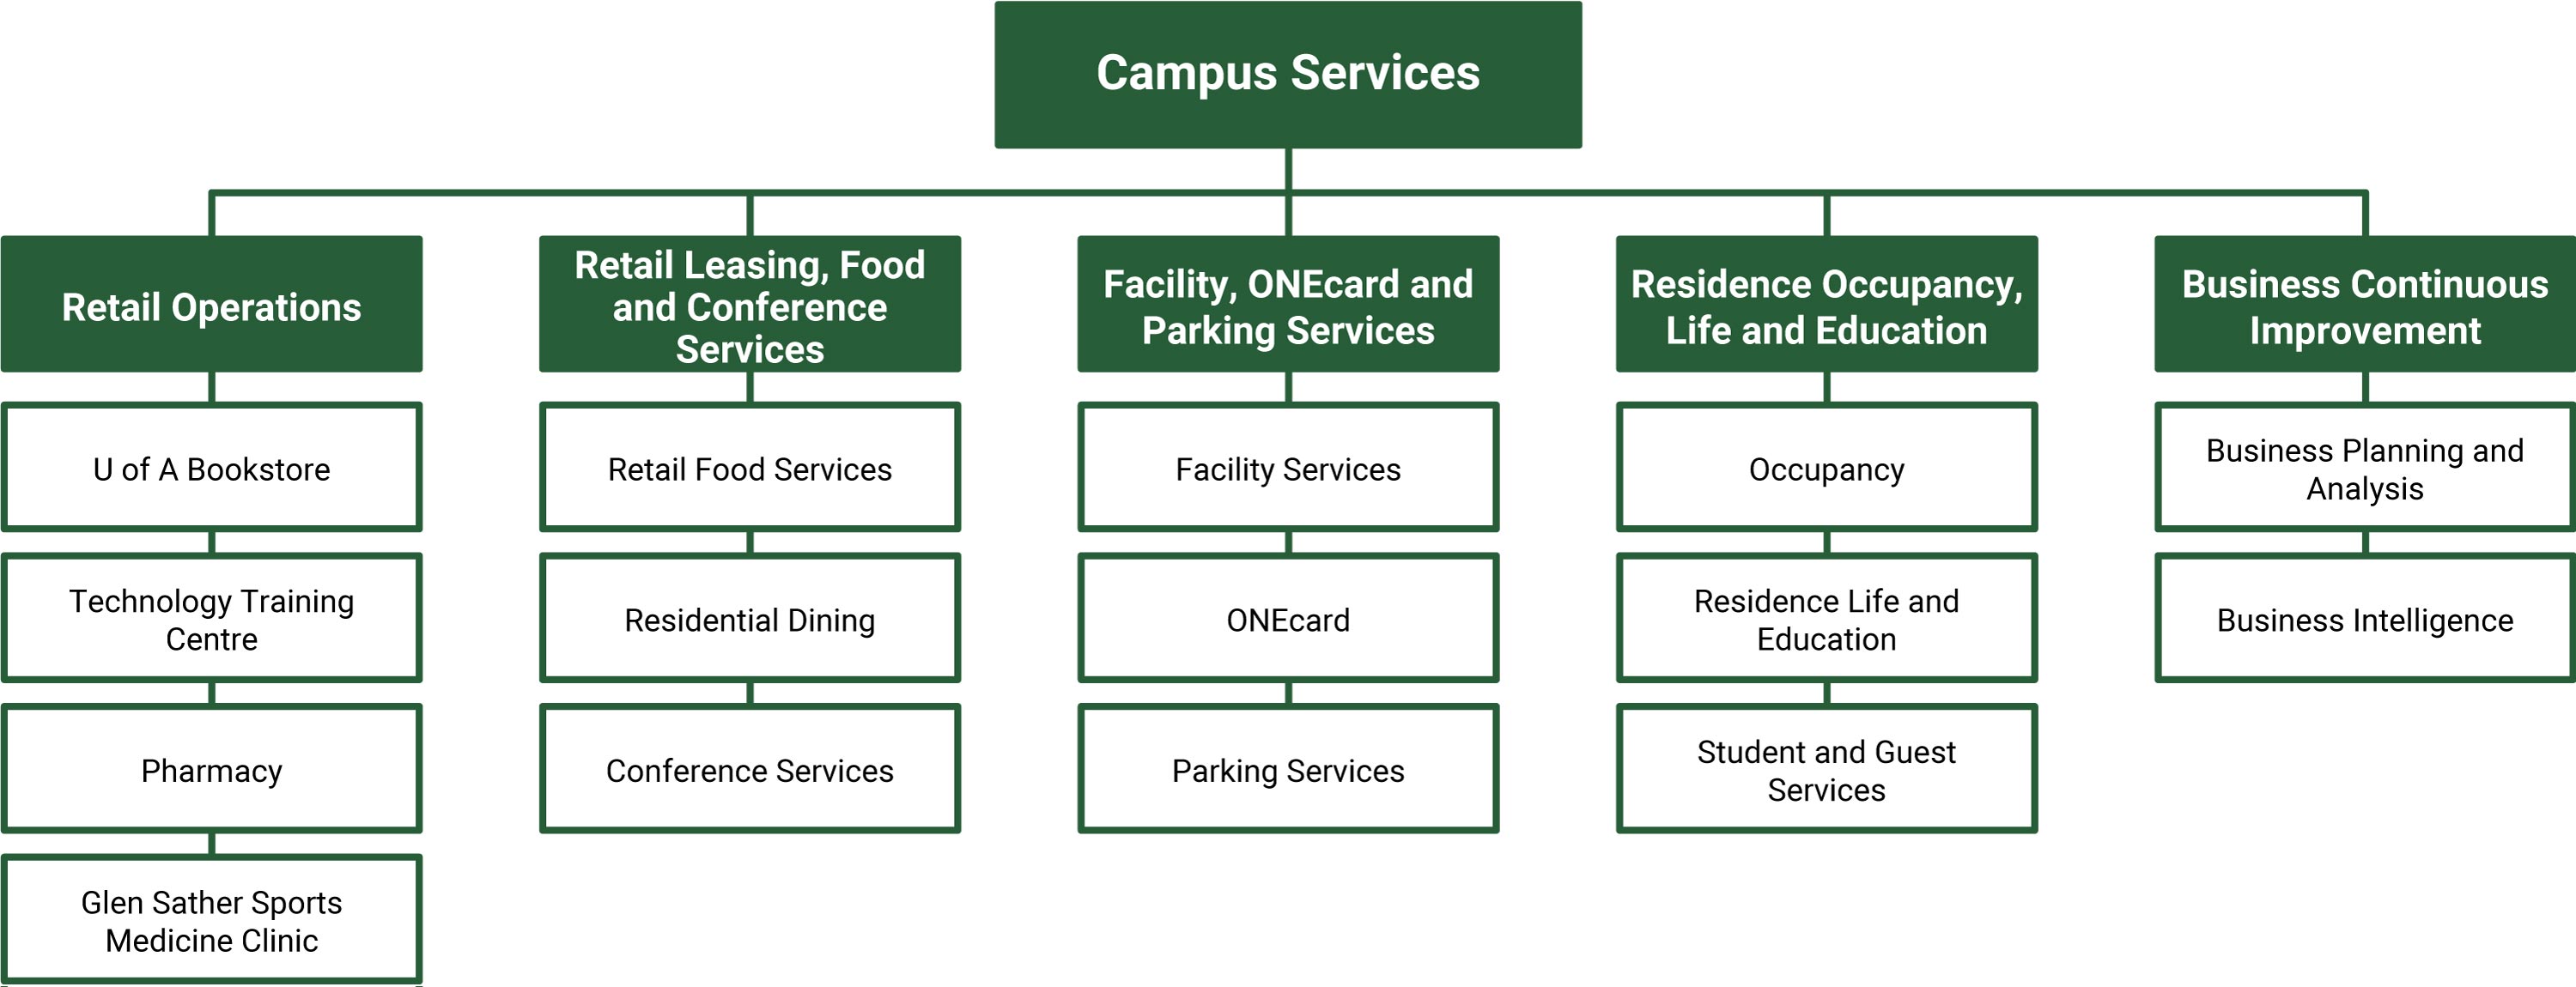 Organizational chart representing the Campus Services unit within the Vice-President Facilities & Operations portfolio